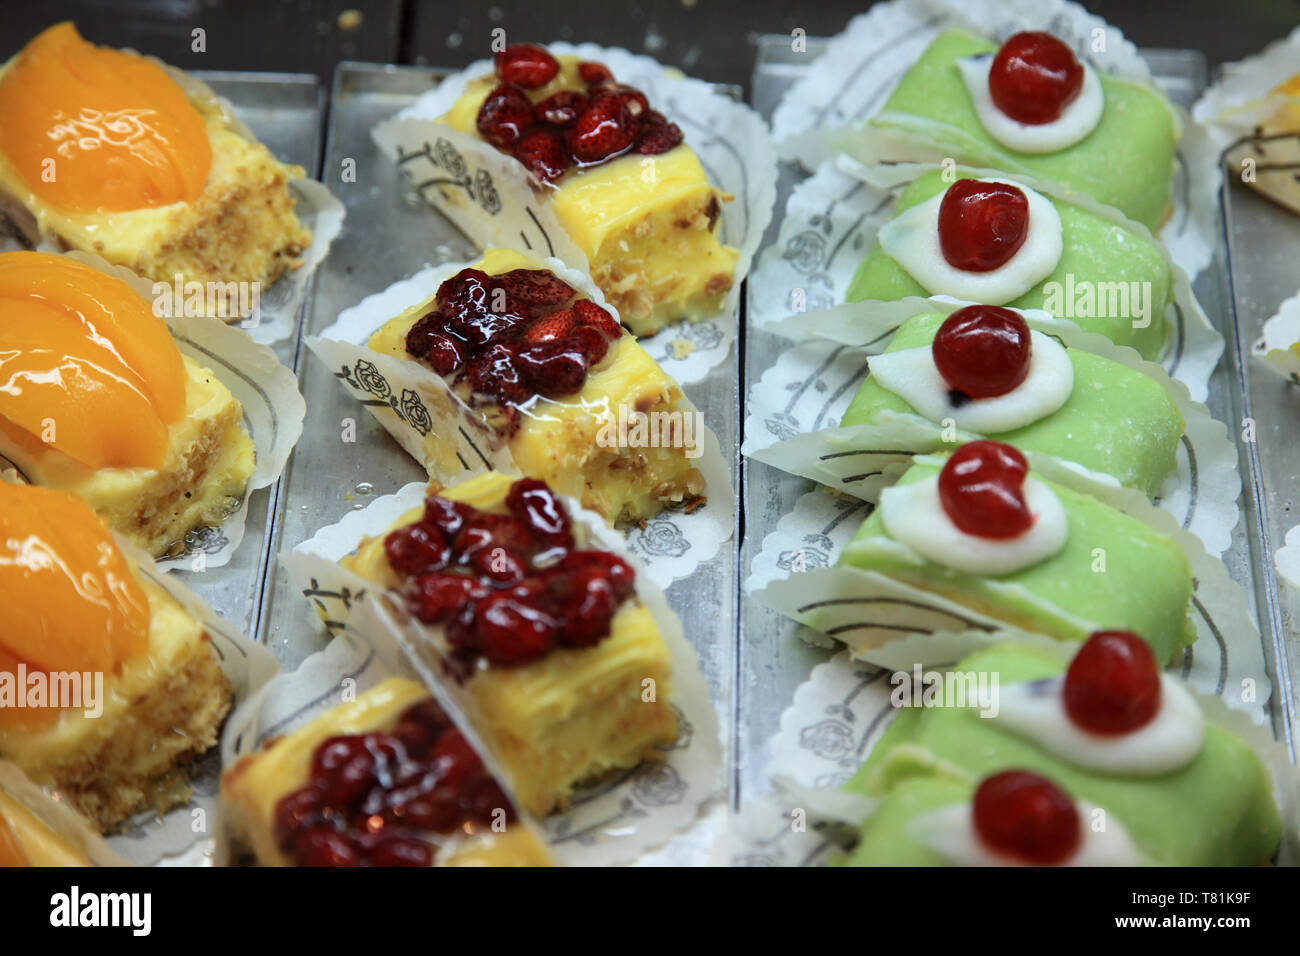 Pastries displayed in Cefalu Sicily Italy Stock Photo